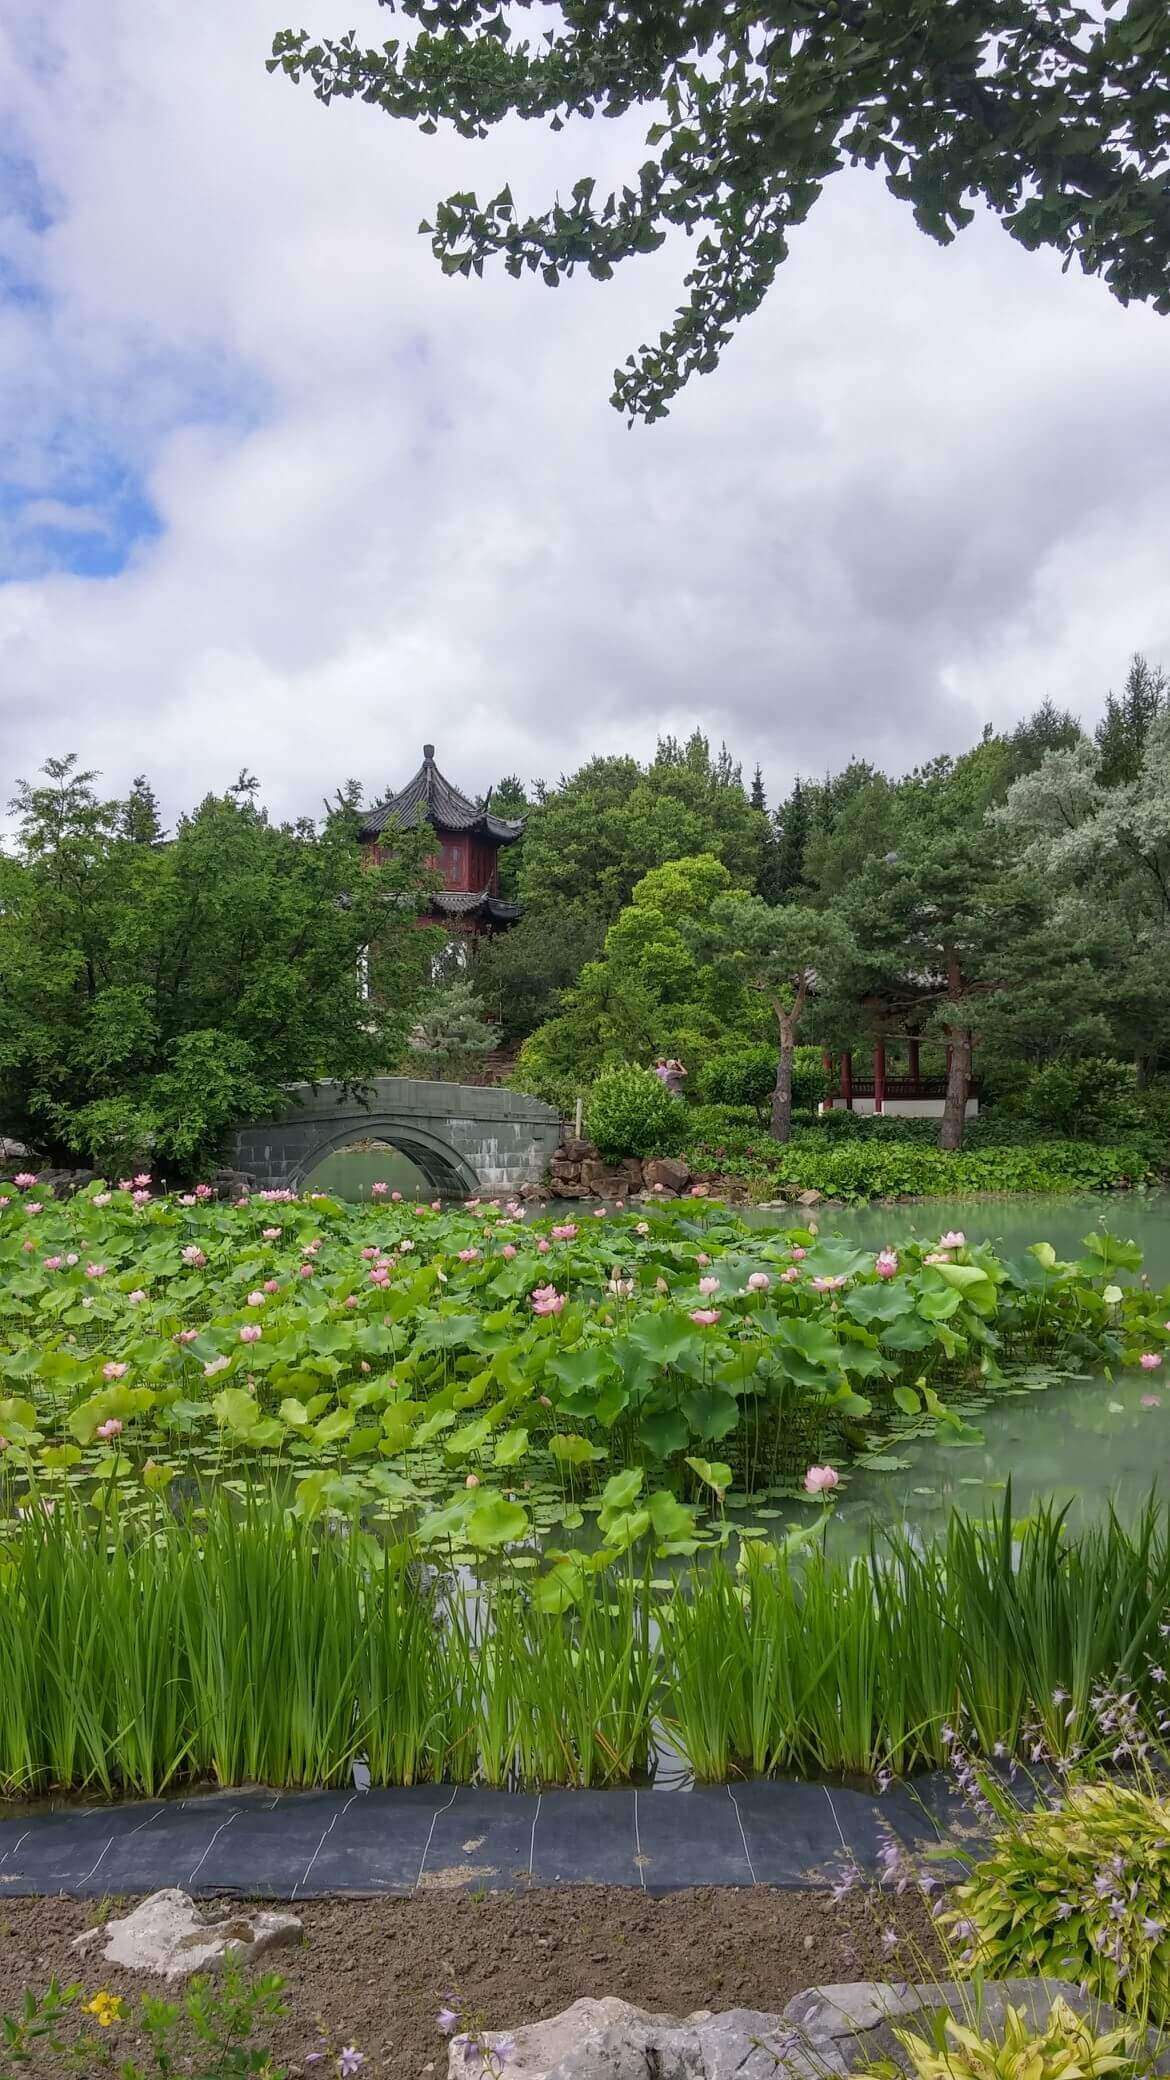 A sizeable pond inside the Chinese gardens